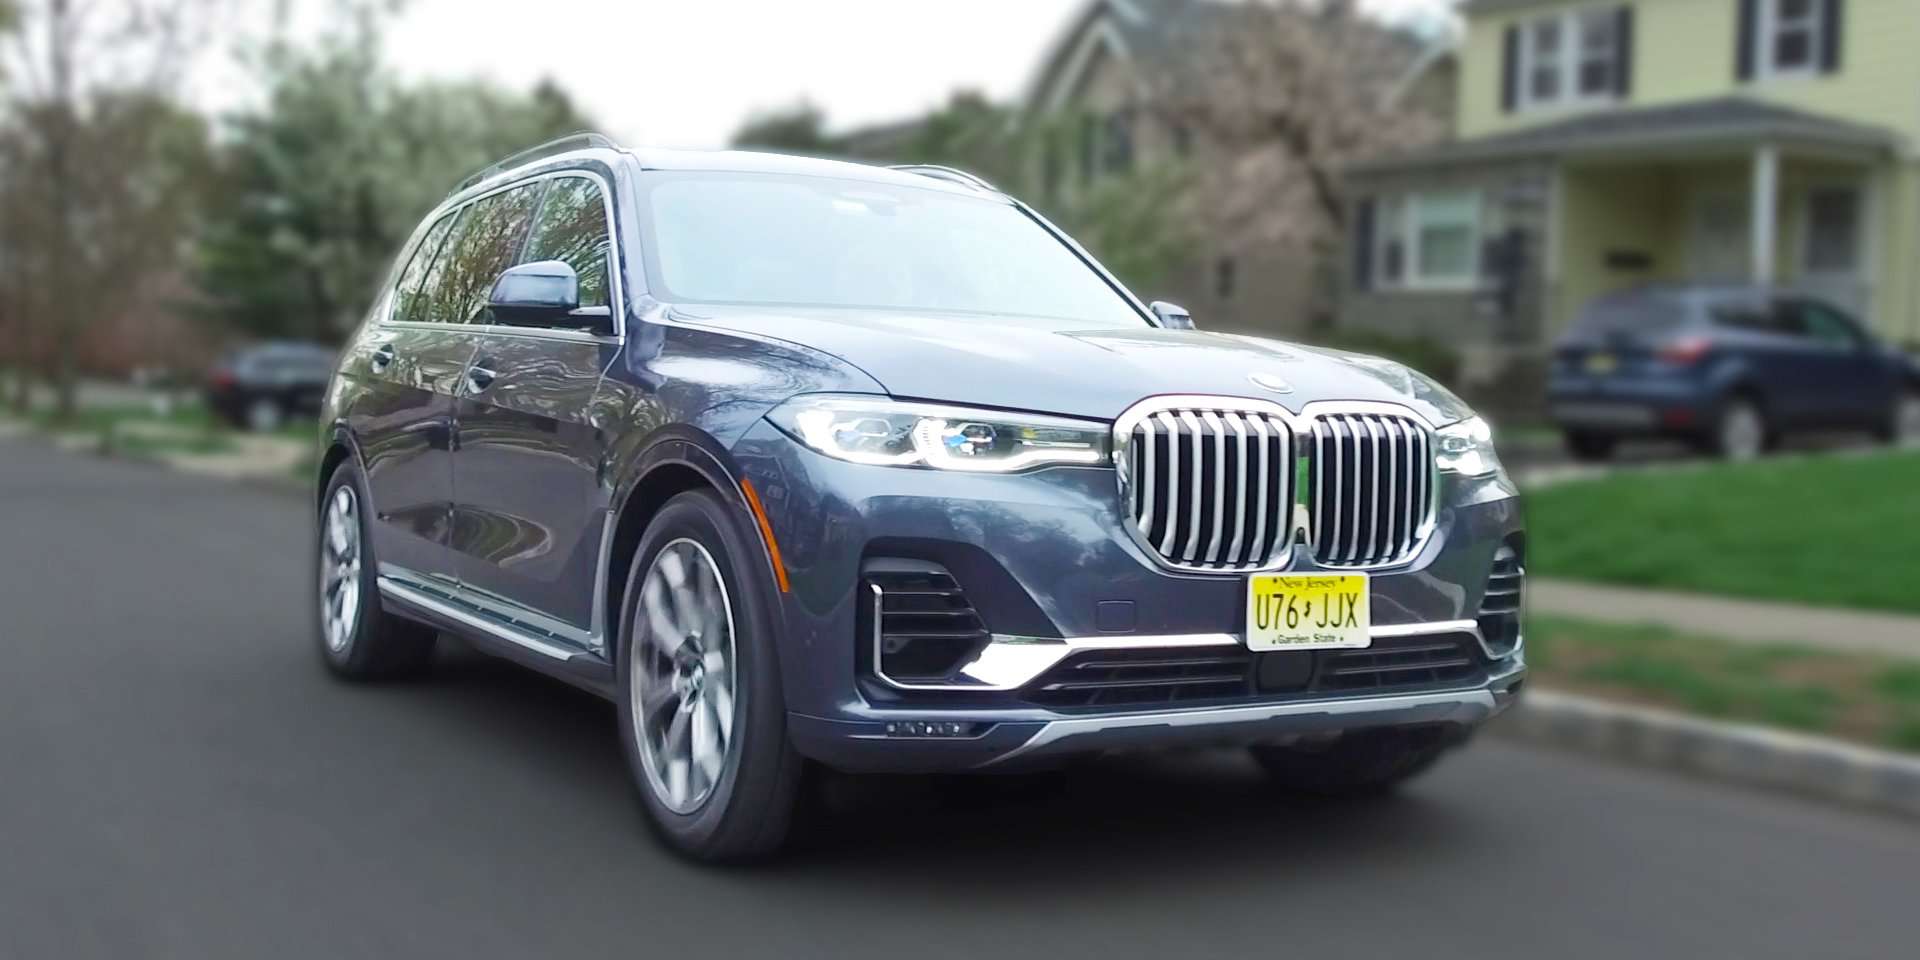 Taboola Ad Example 50710 - We Tested BMW's Largest SUV To See If Its Tech Features Are Helpful Or Gimmicky — Here's The Verdict